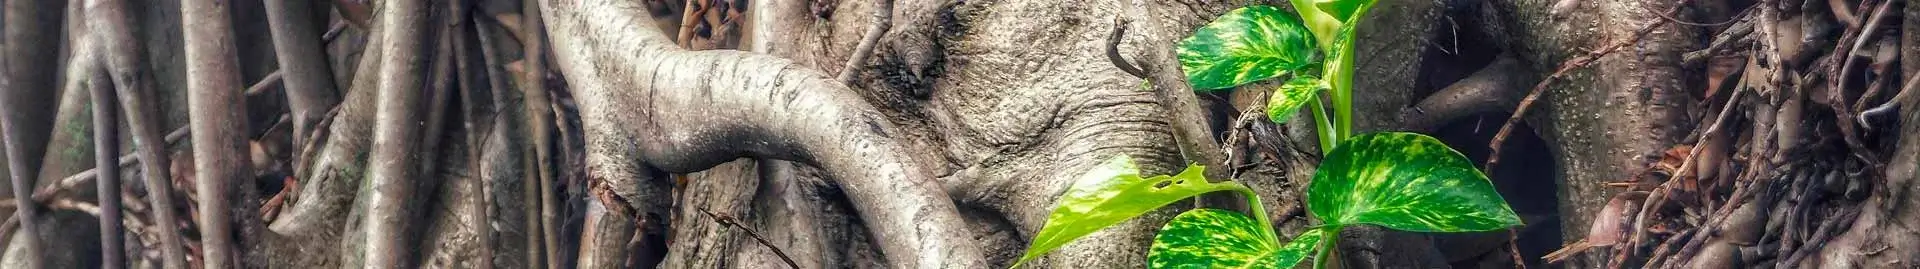 Photo of roots of a tree